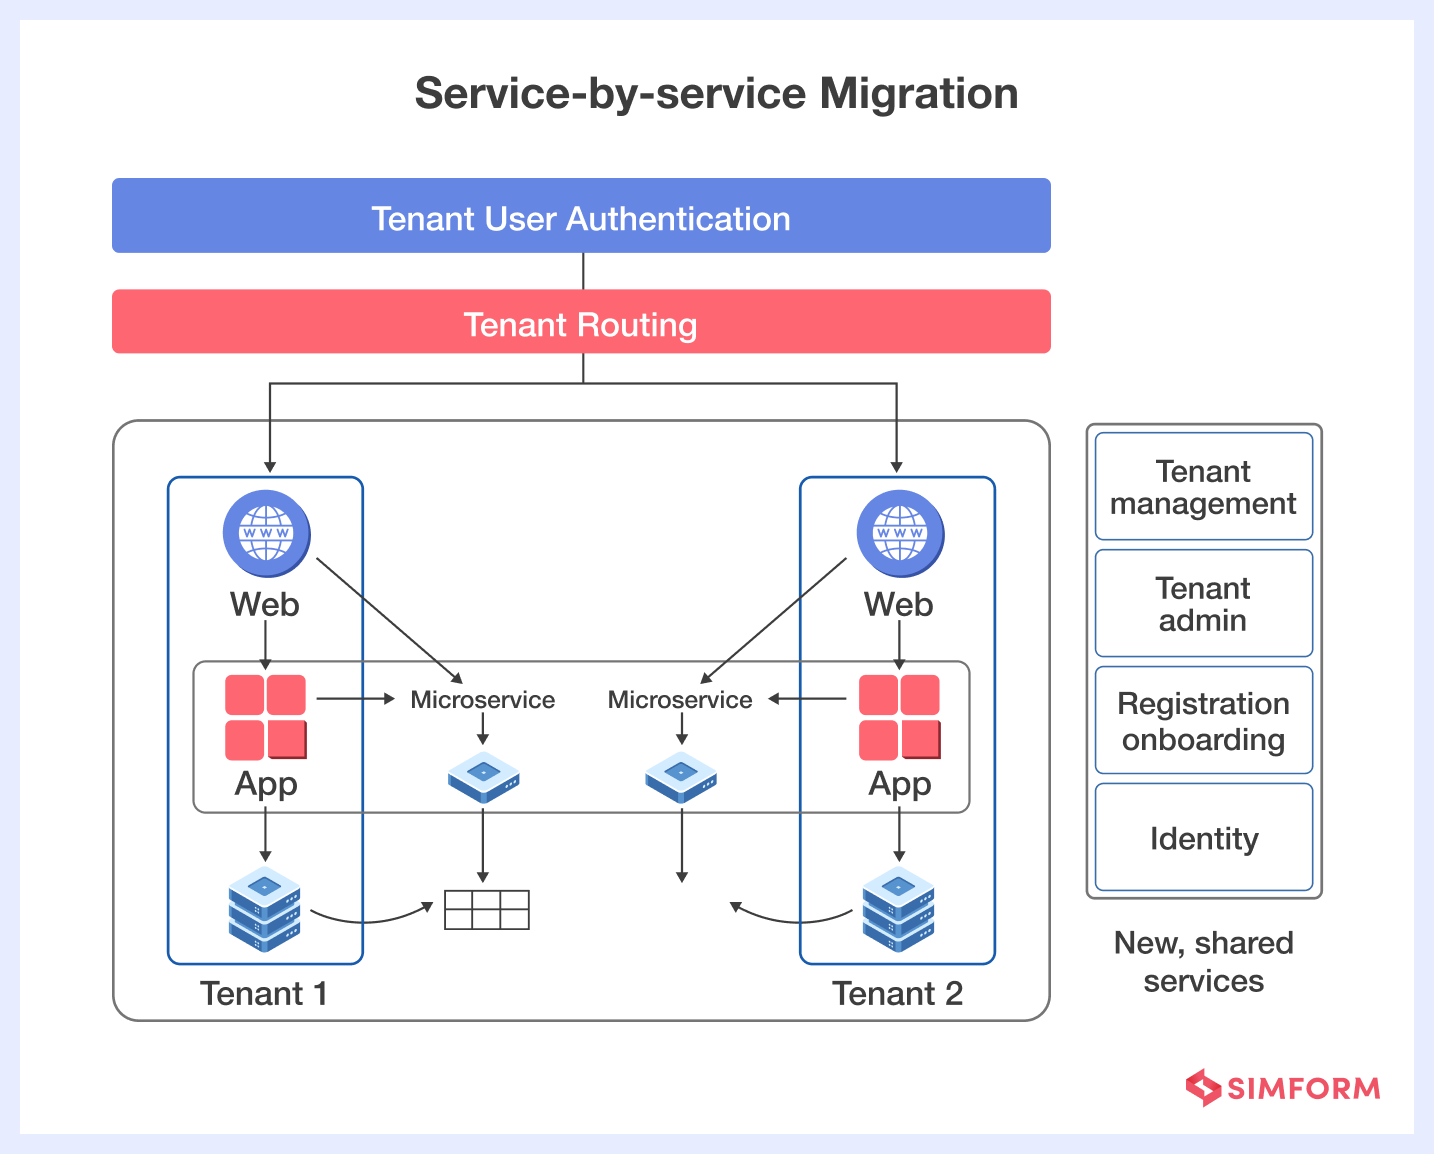 Service-by-service SaaS migration